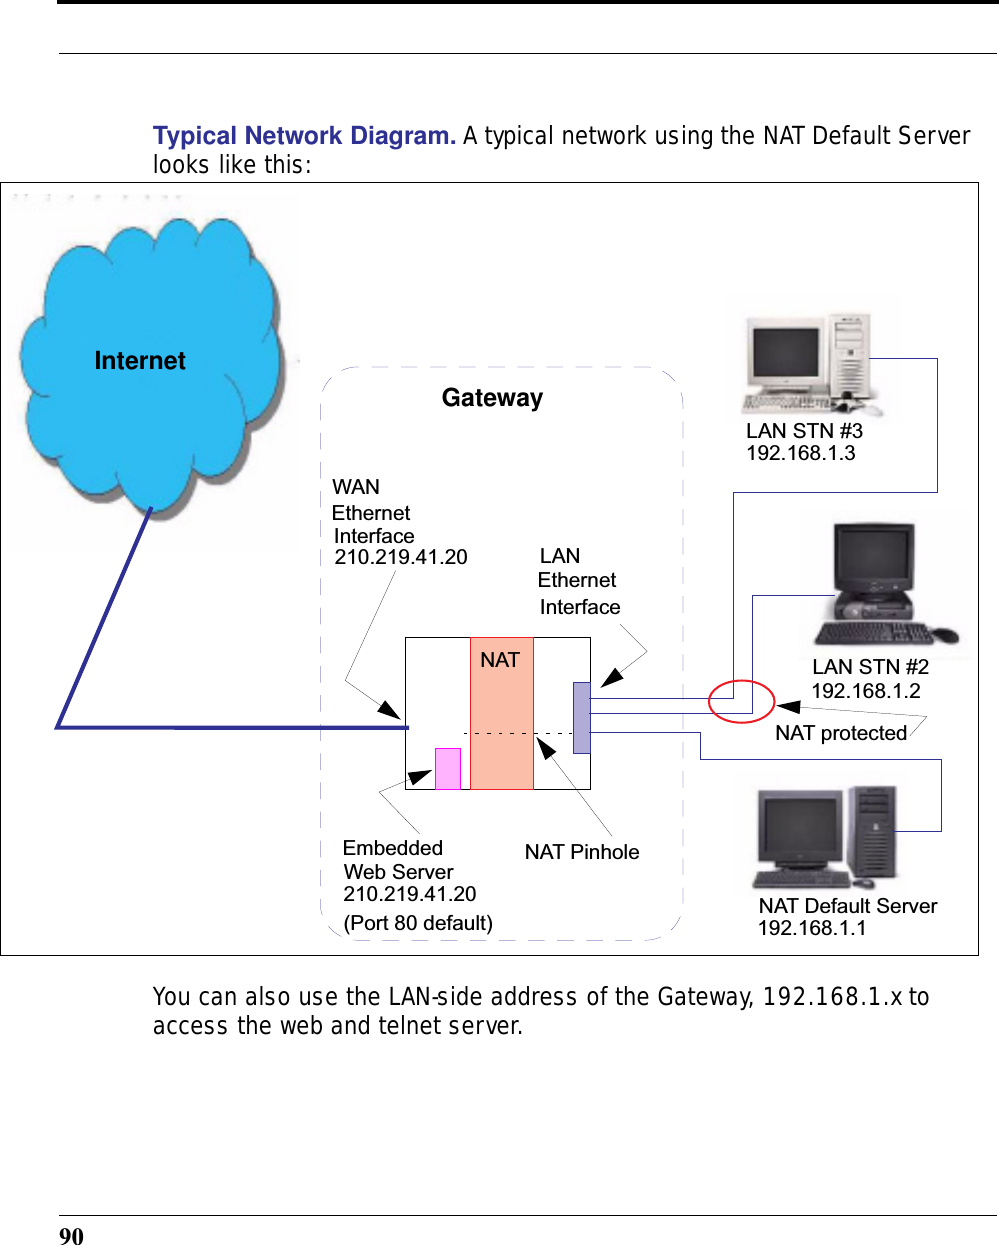 90Typical Network Diagram. A typical network using the NAT Default Server looks like this:You can also use the LAN-side address of the Gateway, 192.168.1.x to access the web and telnet server.WANLANEthernet Interface192.168.1.3192.168.1.2192.168.1.1LAN STN #3LAN STN #2NAT Default ServerGatewayNATNAT PinholeEmbeddedWeb Server210.219.41.20210.219.41.20(Port 80 default)NAT protectedEthernet InterfaceInternet